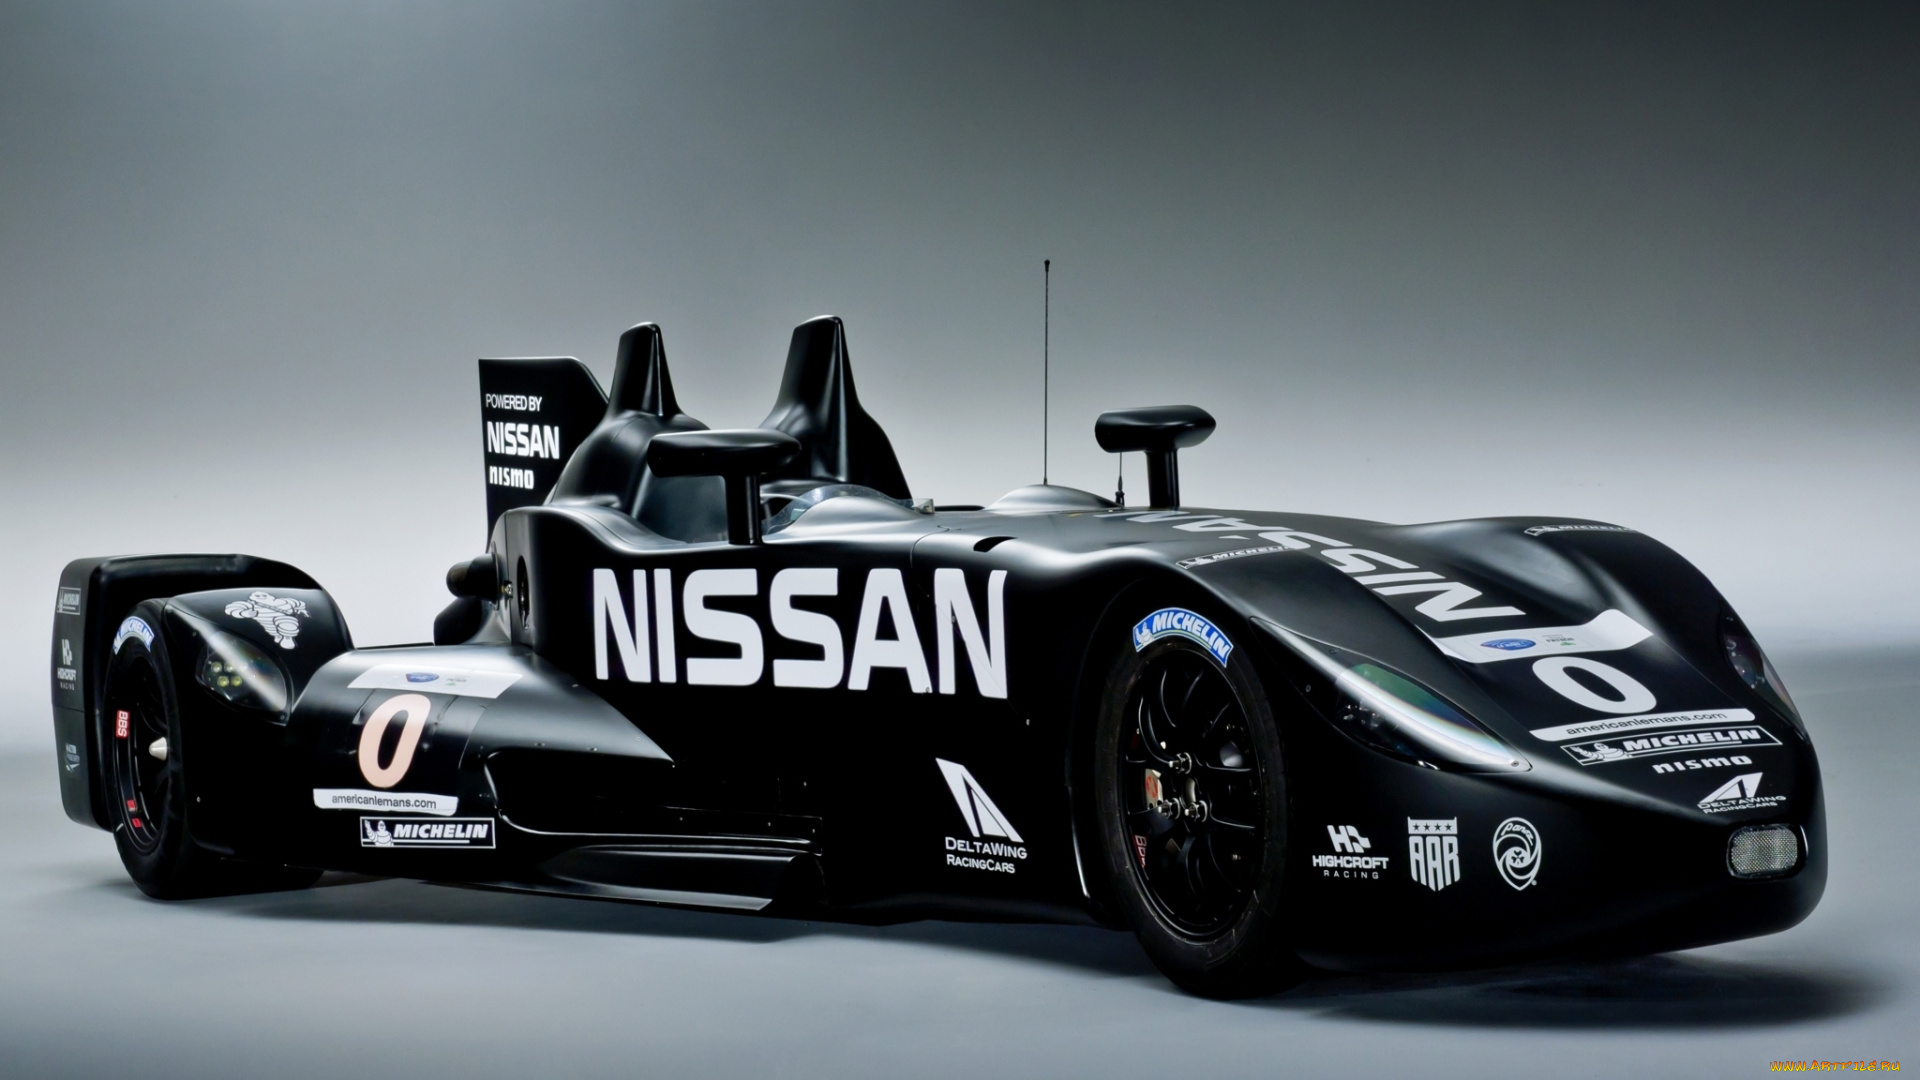 nissan, deltawing, experimental, race, car, 2012, автомобили, nissan, datsun, 2012, car, race, experimental, deltawing